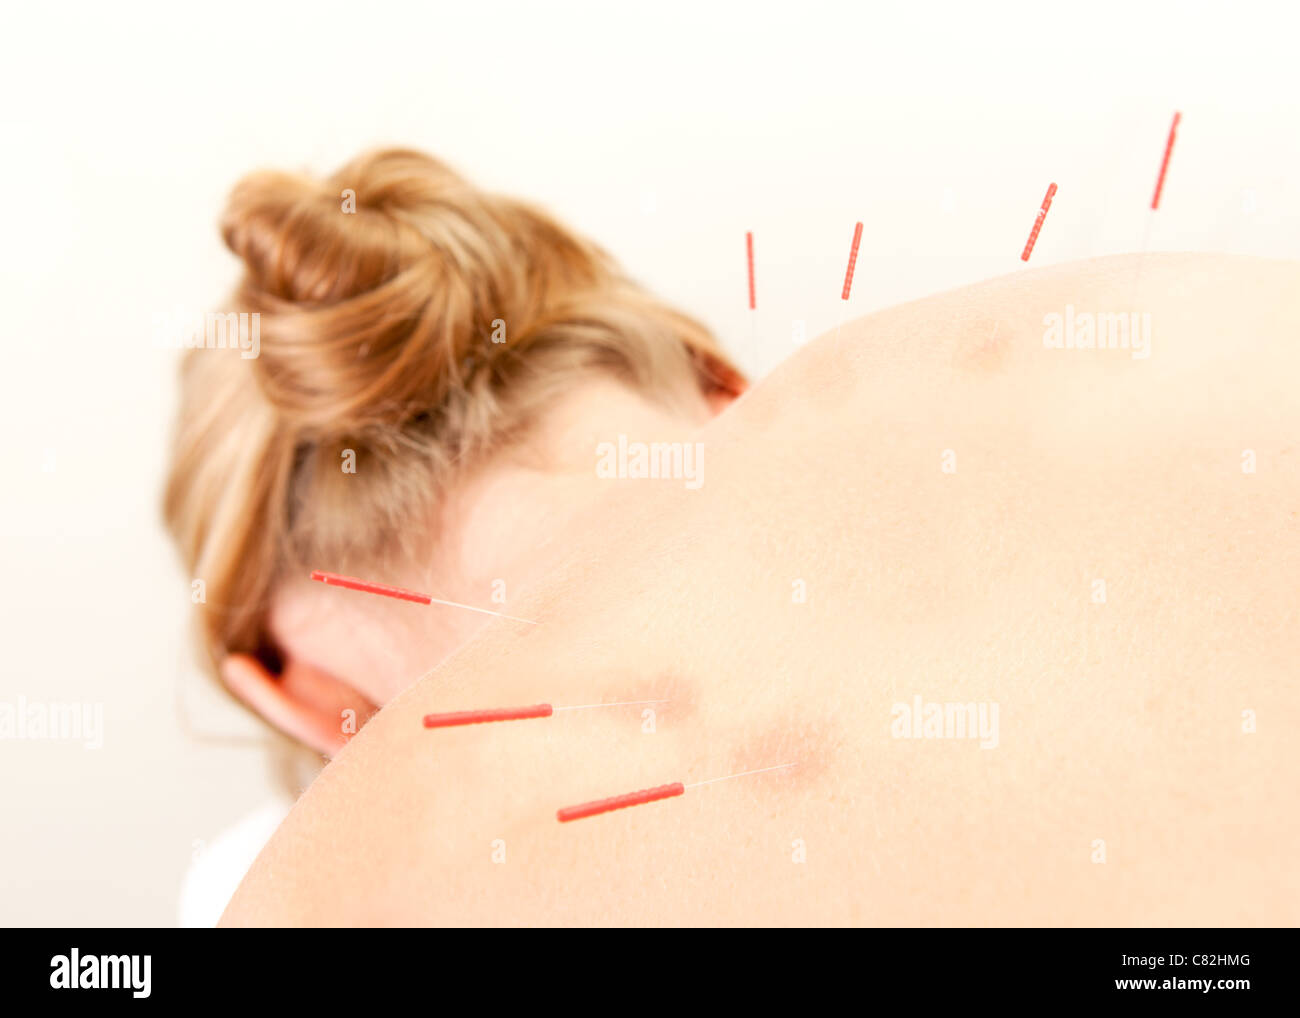 Female acupuncture patient showing good redness at the needle points, a sign of good response to the treatment Stock Photo